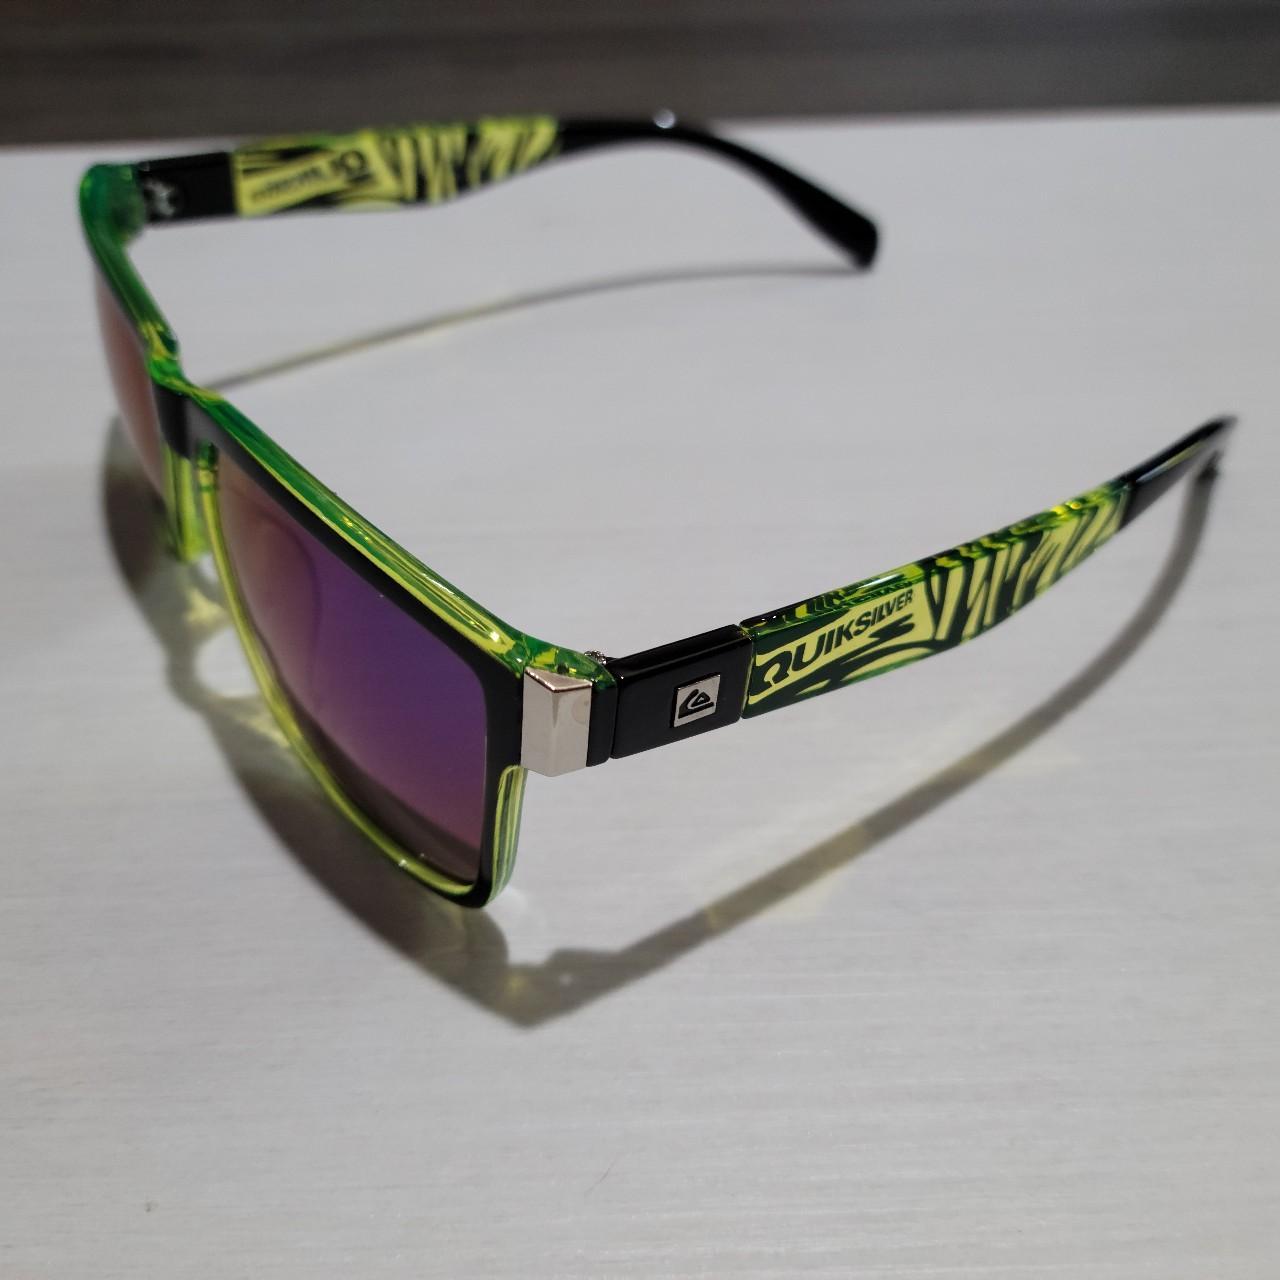 polarized quiksilver sunglasses, and - New green Depop black...